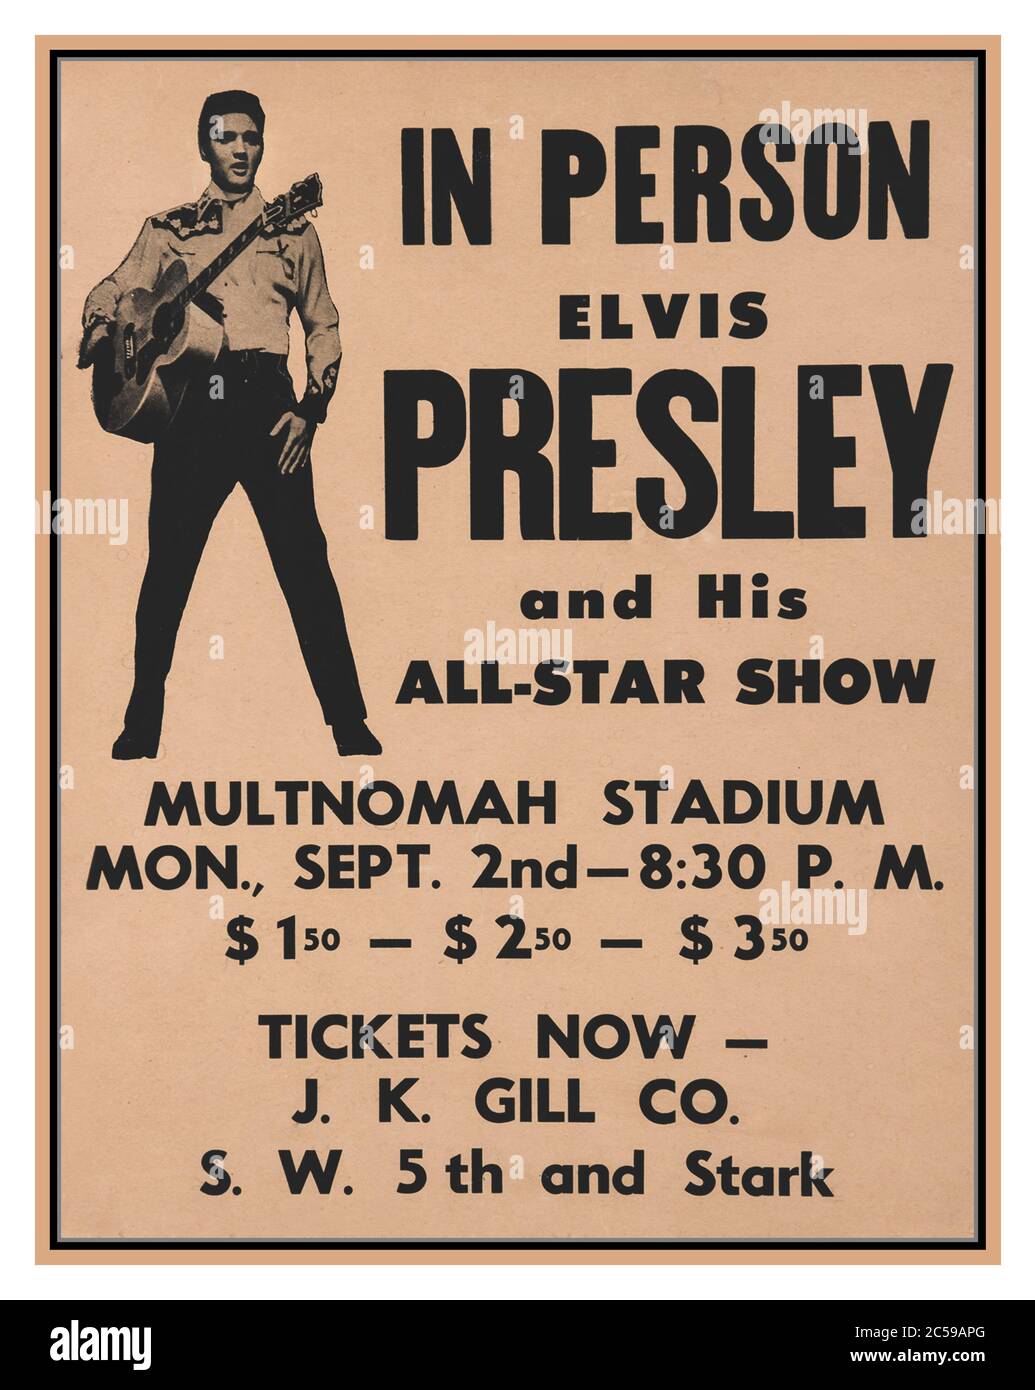 1950's Vintage Elvis Presley all star Live Show Poster September 2, 1957, Elvis Presley, Scotty Moore, Bill Black and DJ Fontana performed one show at Multnomah Civic Stadium as the last stop on a whirlwind five city, four day tour of the Pacific Northwest that included Spokane, Vancouver, Tacoma, and Seattle. It was only the second tour that year and was promoted by Lee Gordon, who had promoted the earlier tour in the Spring of Canada and the Midwest Stock Photo